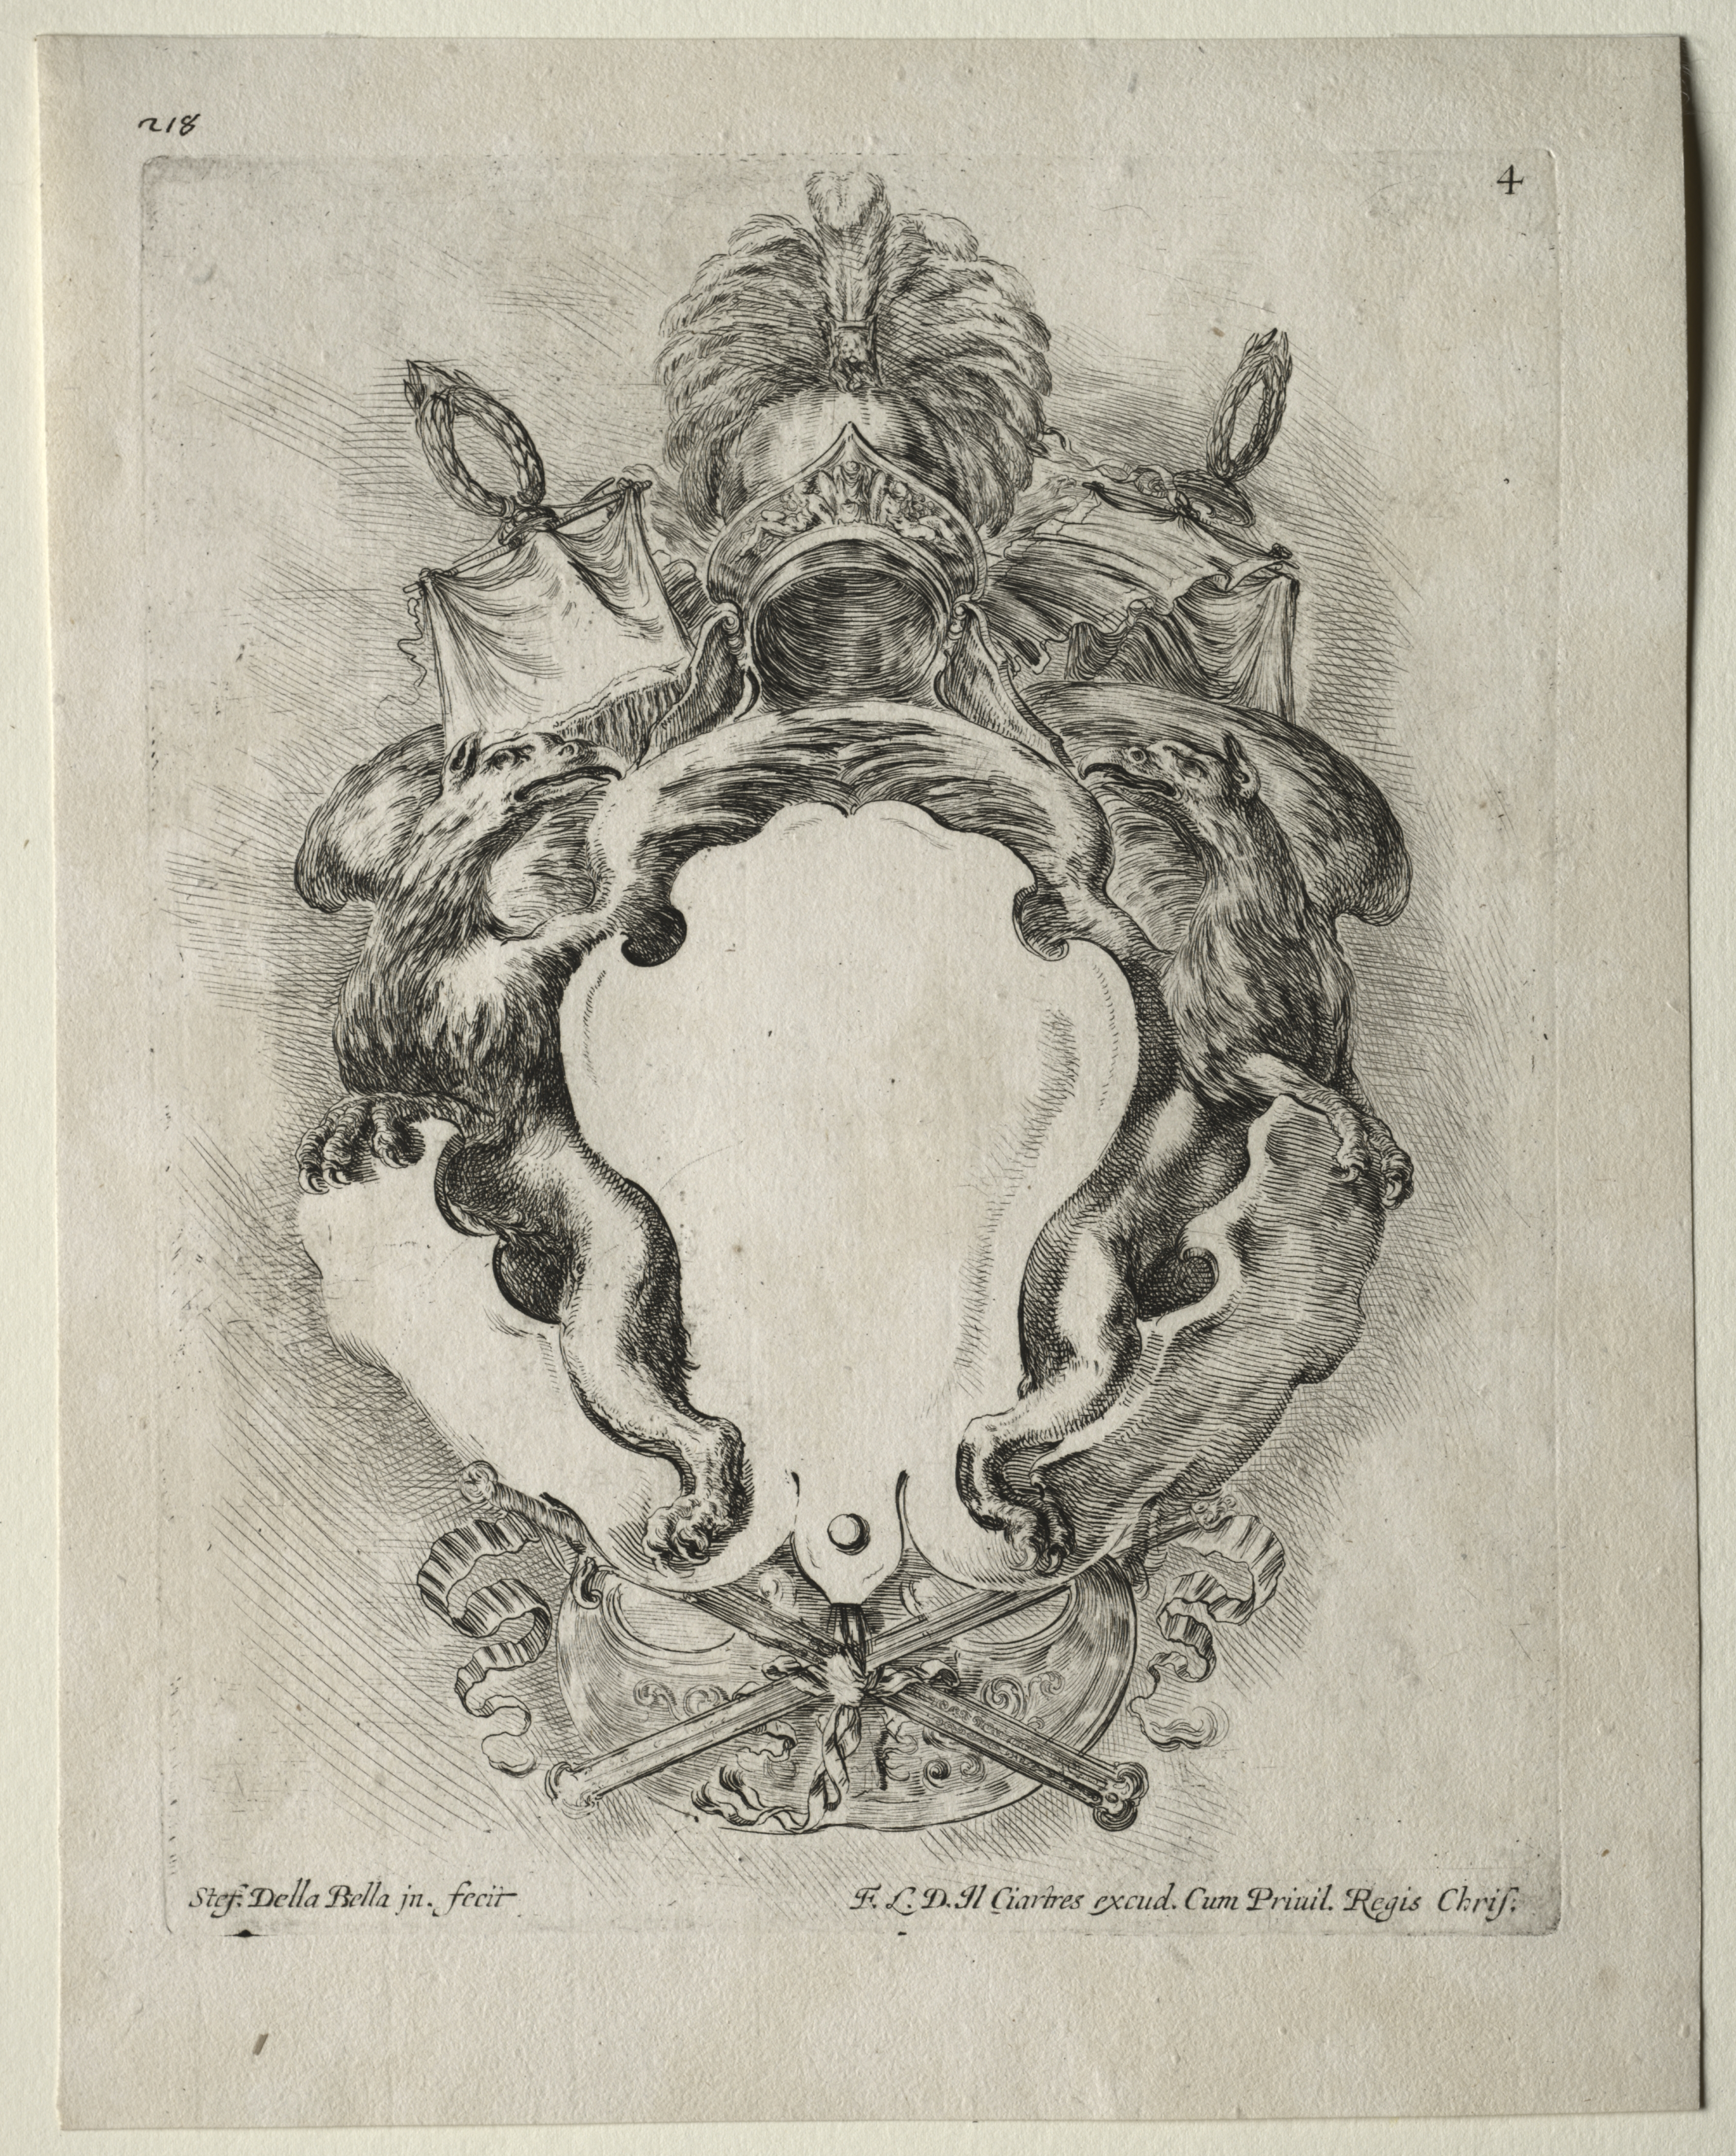 Collection of Various Caprices and New Designs of Cartouches and Ornaments:  No. 4